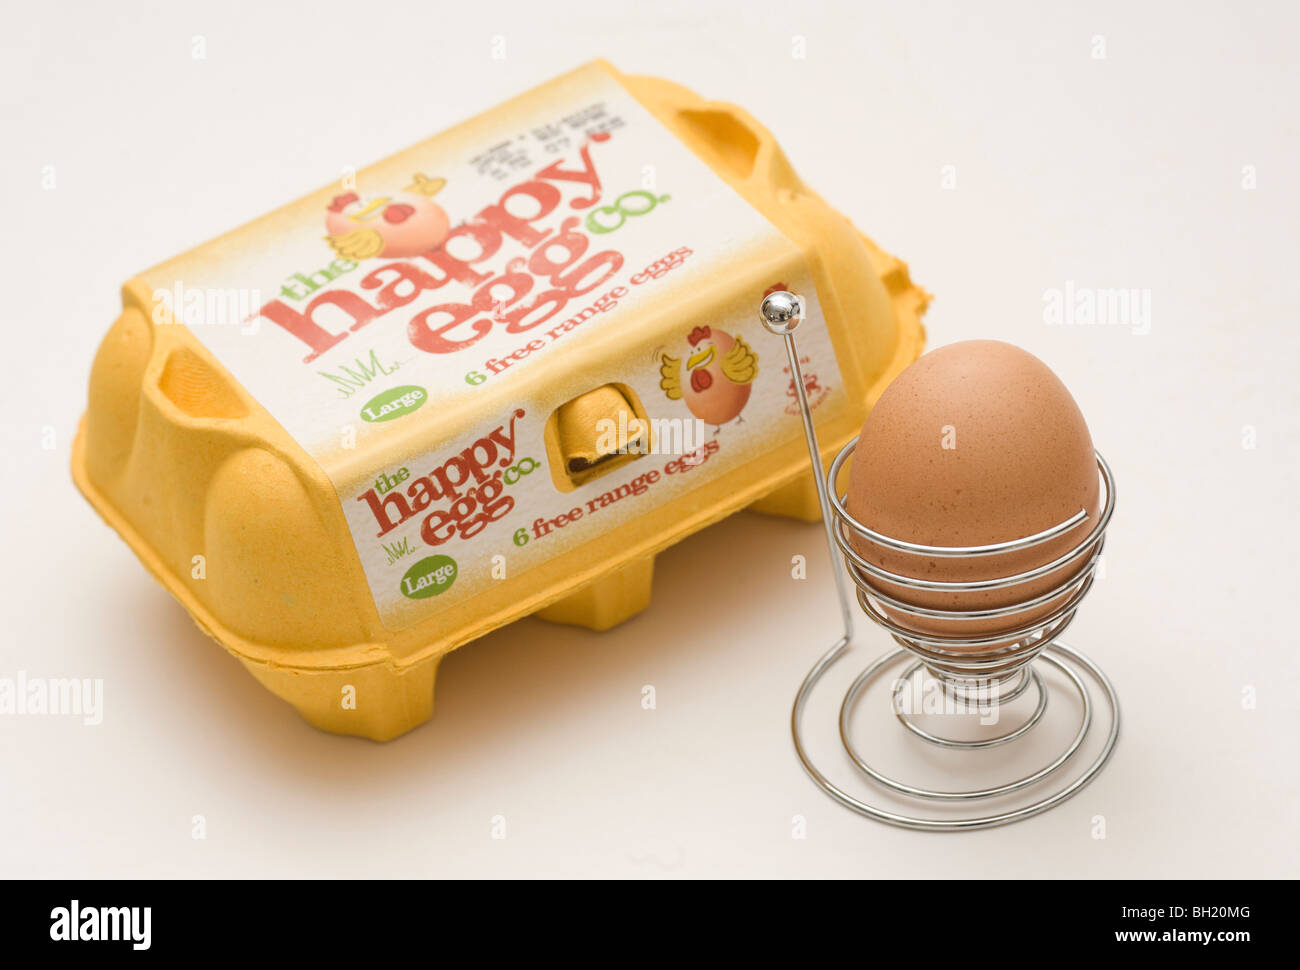 Free Range Eggs.  Picture by James Boardman Stock Photo